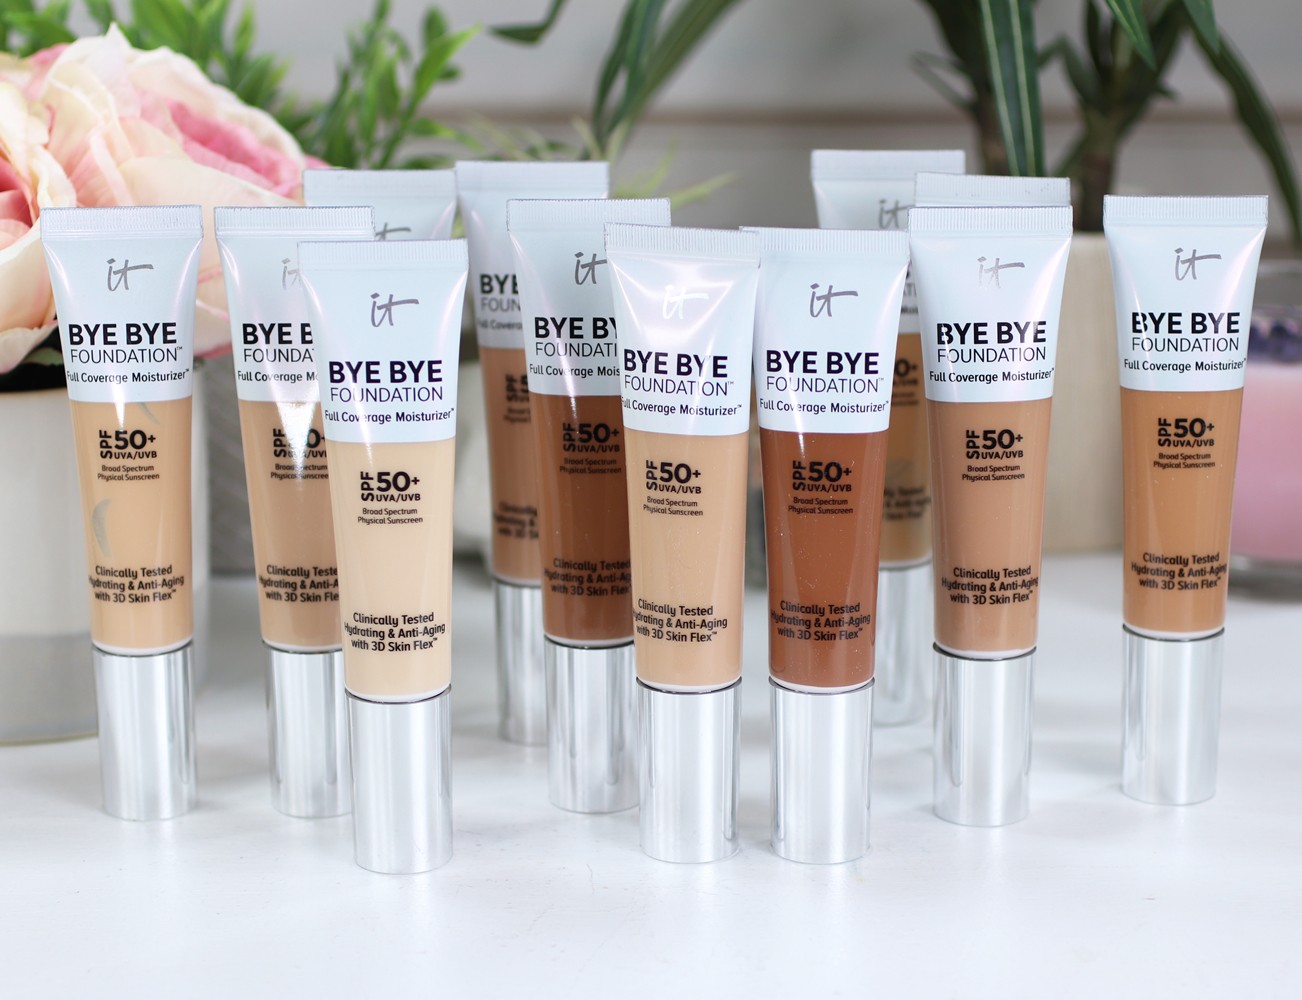 It Cosmetics Bye Bye Foundation Review and Swatches - Best Cruelty Free Sunscreen for Your Face by popular Los Angeles cruelty free beauty blogger My Beauty Bunny